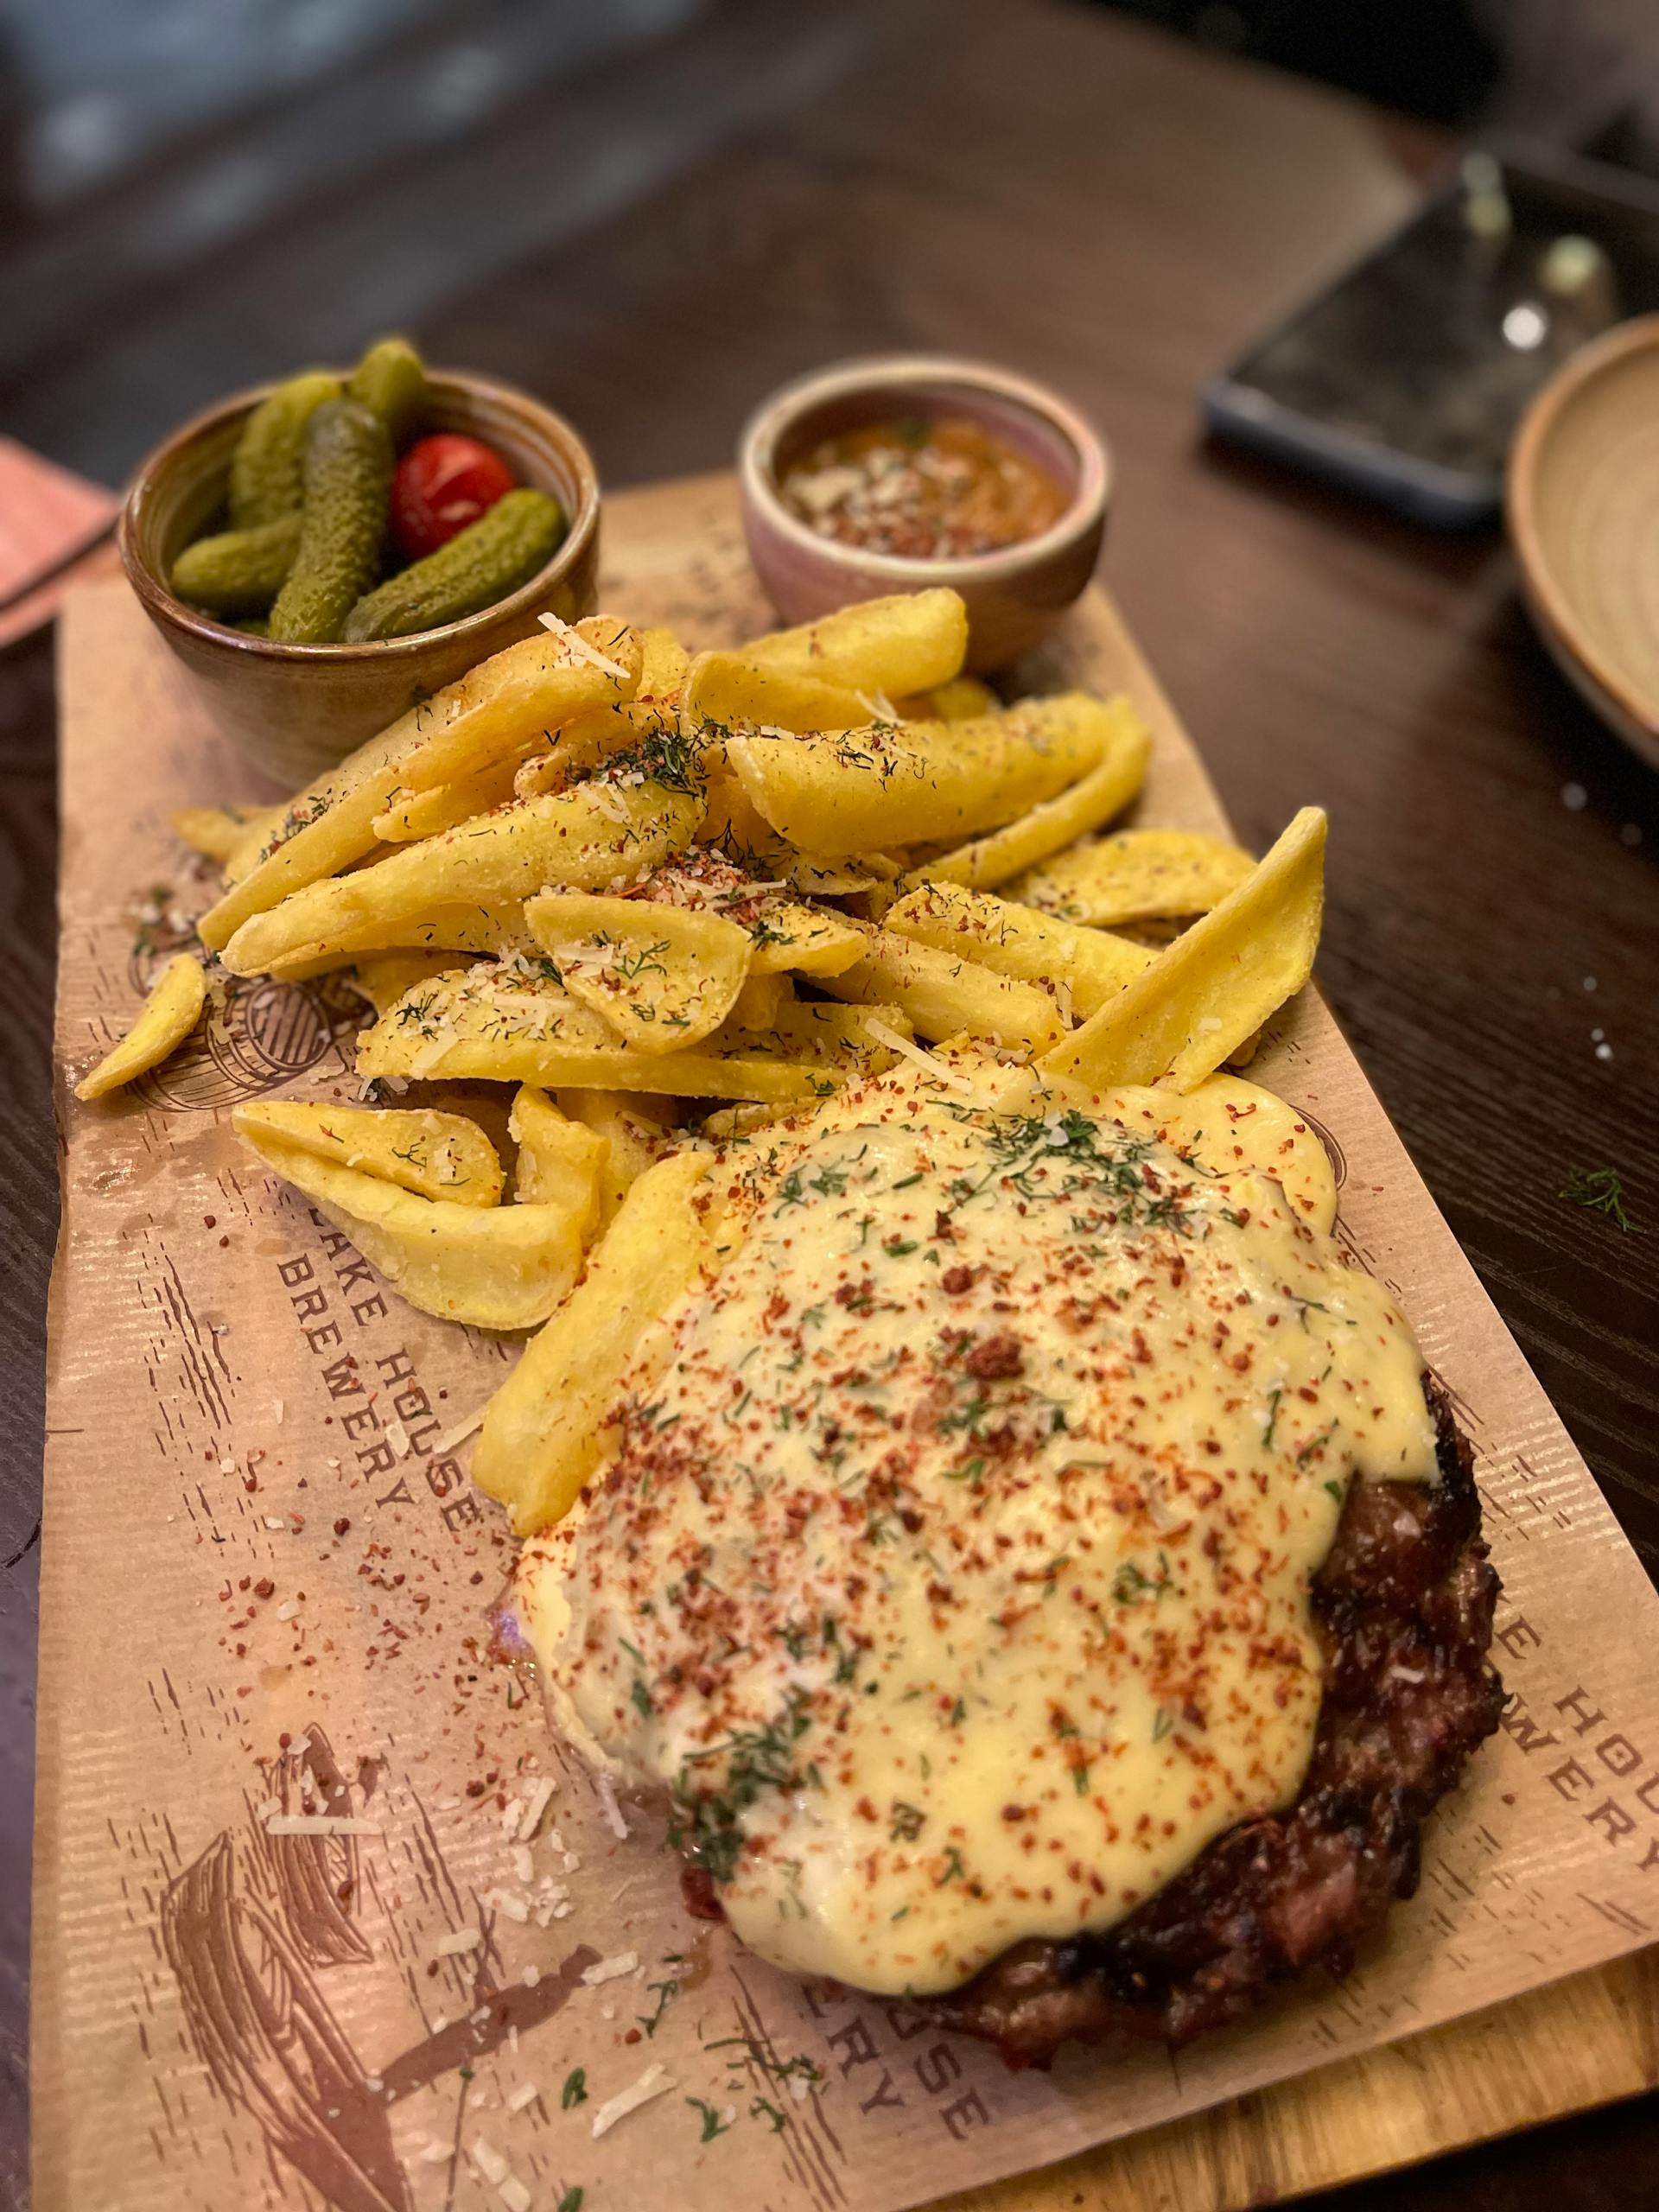 Steak with a side of french fries | Source: Pexels